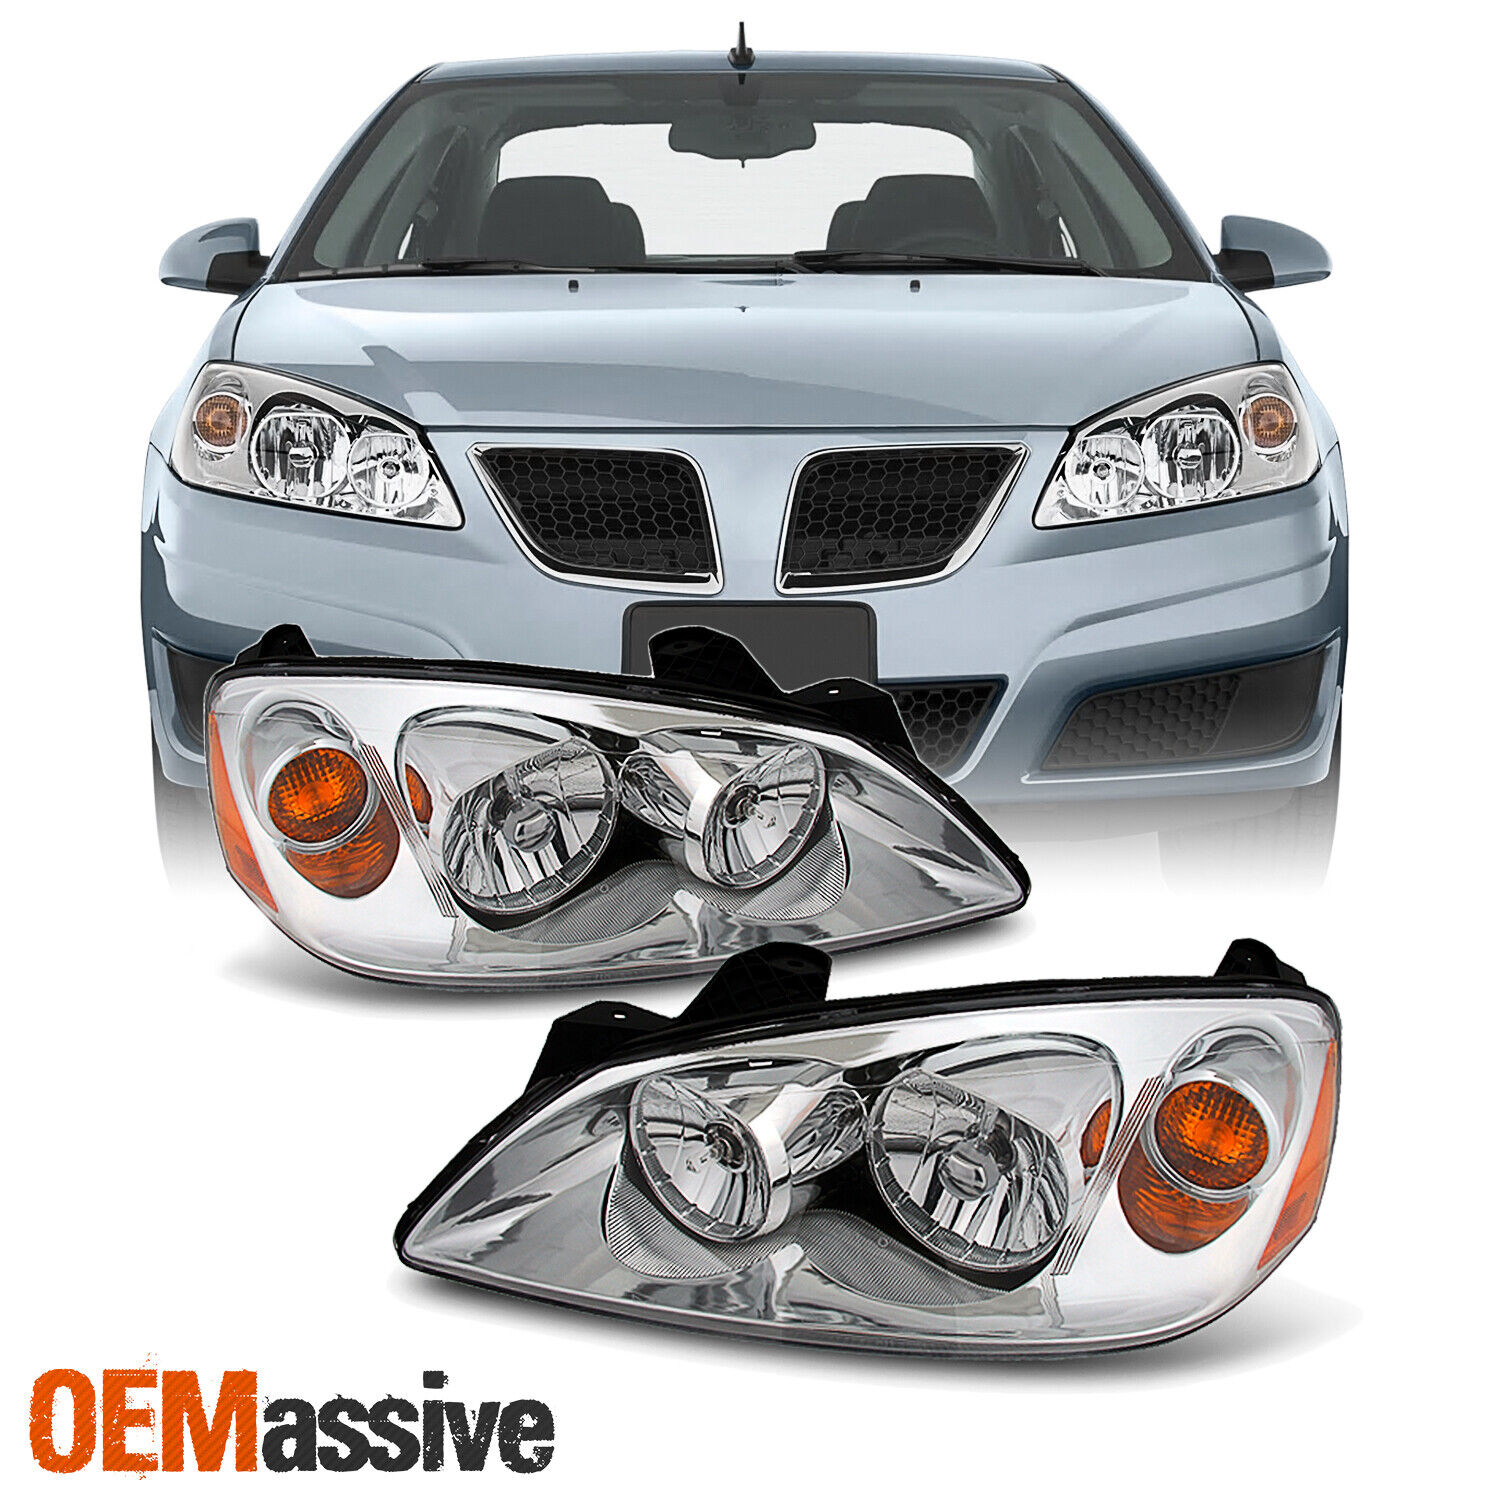 Fit 2005-2010 Ponitac G6 Headlights Lamps Replacement Left+Right 05 07 08 09 10